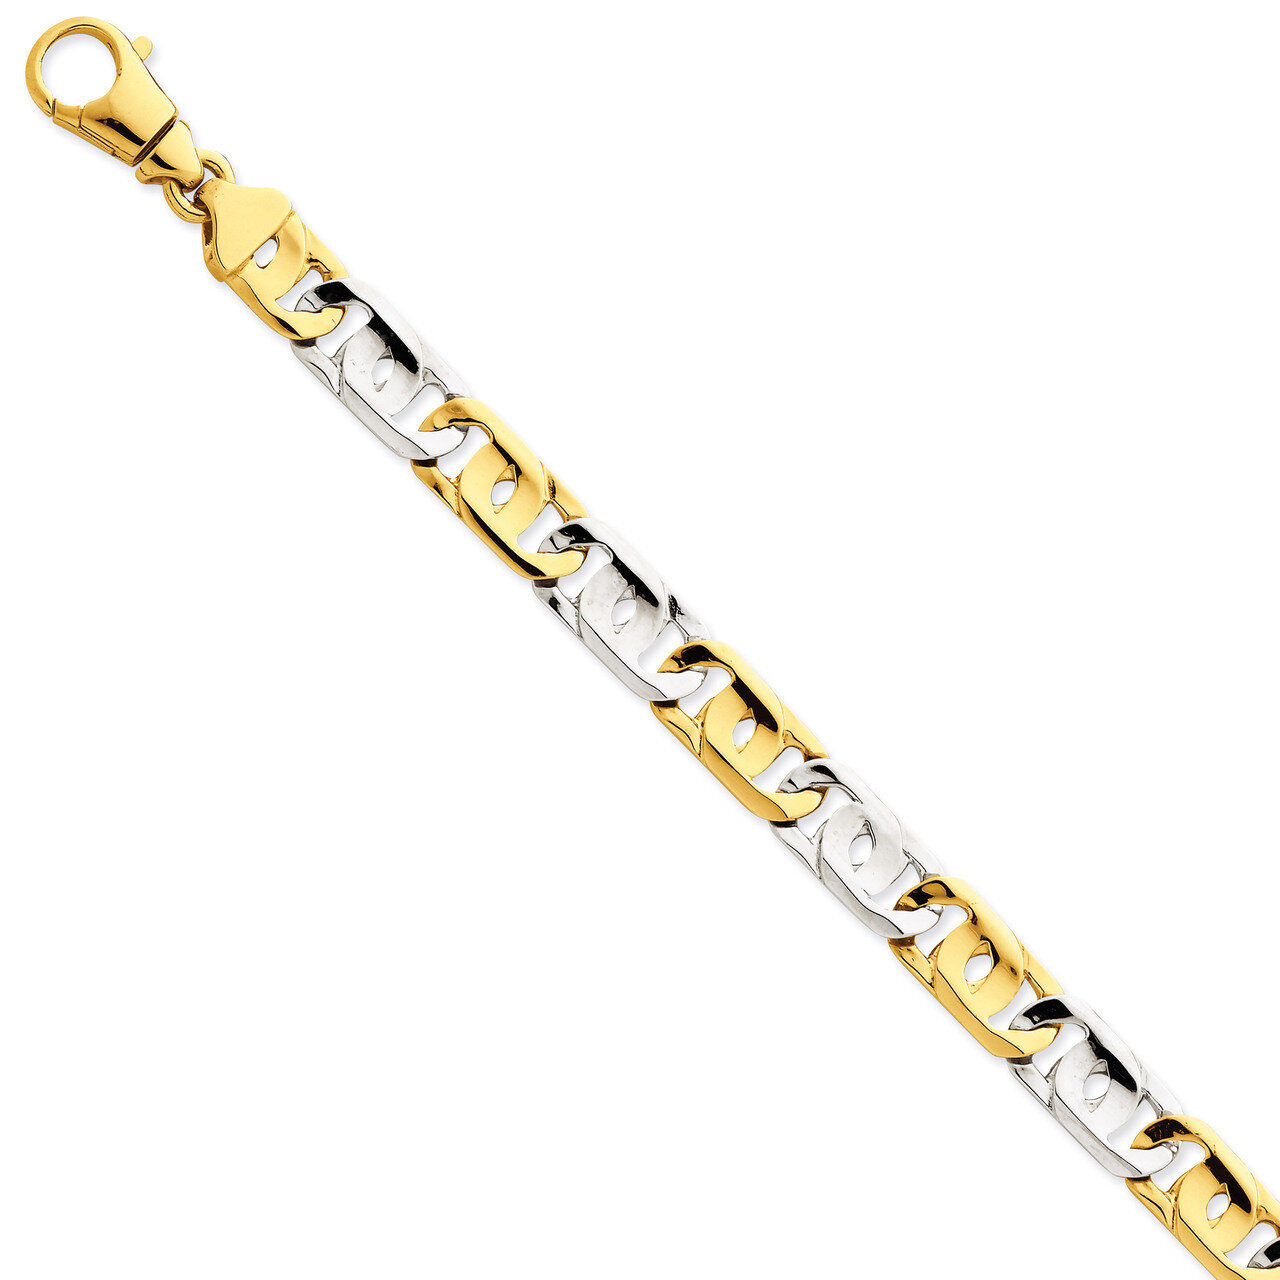 10.2mm Polished Fancy Link Chain 22 Inch 14k Two-Tone Gold LK533-22